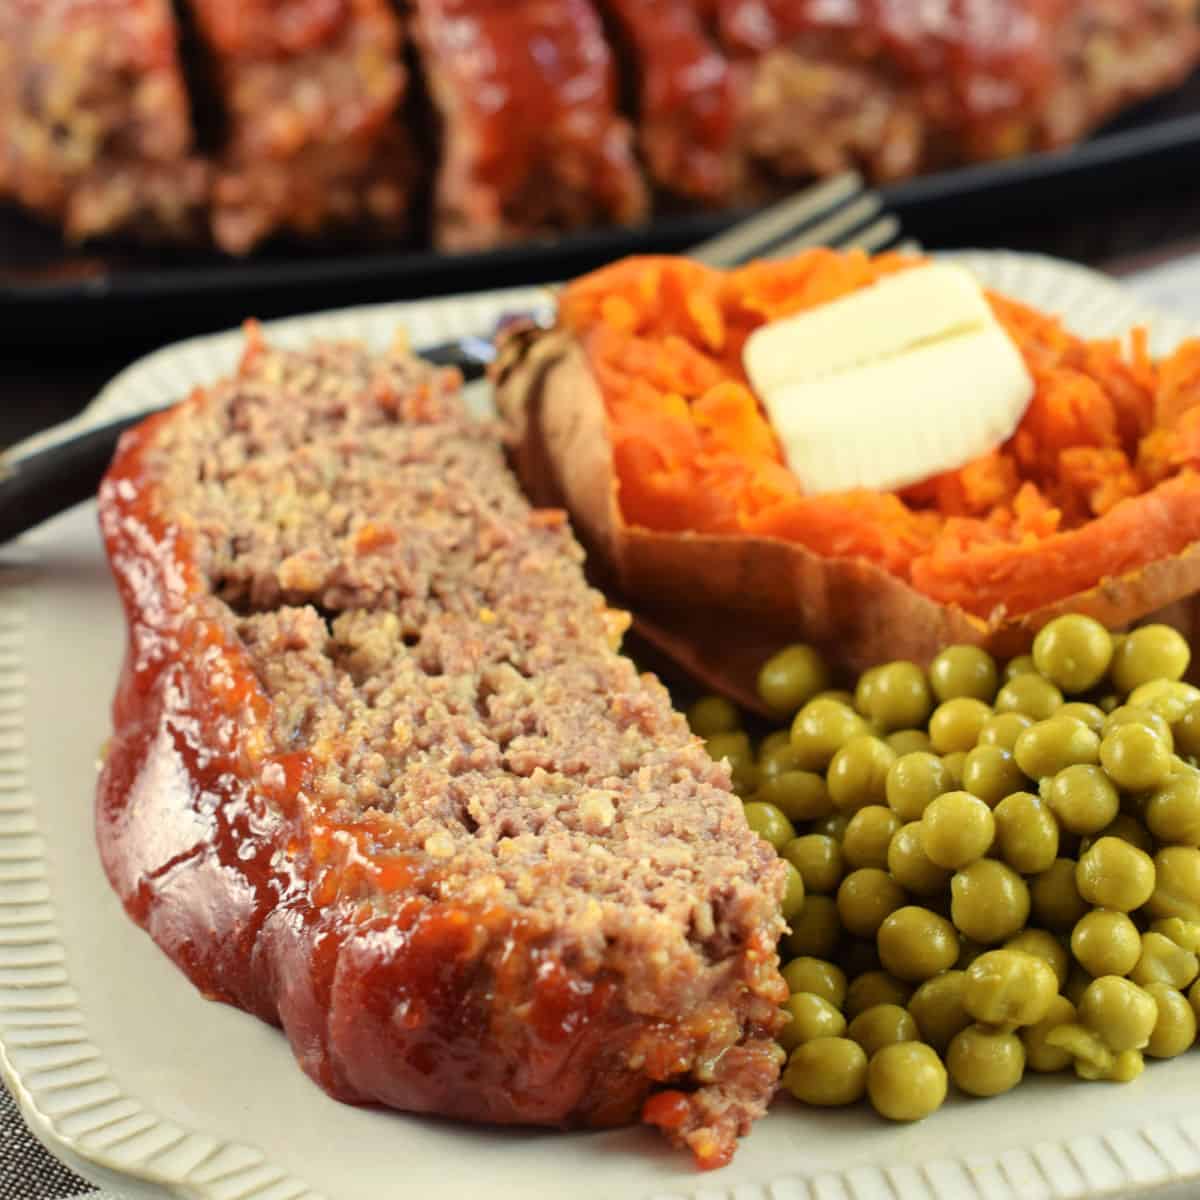 Meatloaf with glaze served on a plate with peas and sweet potato.